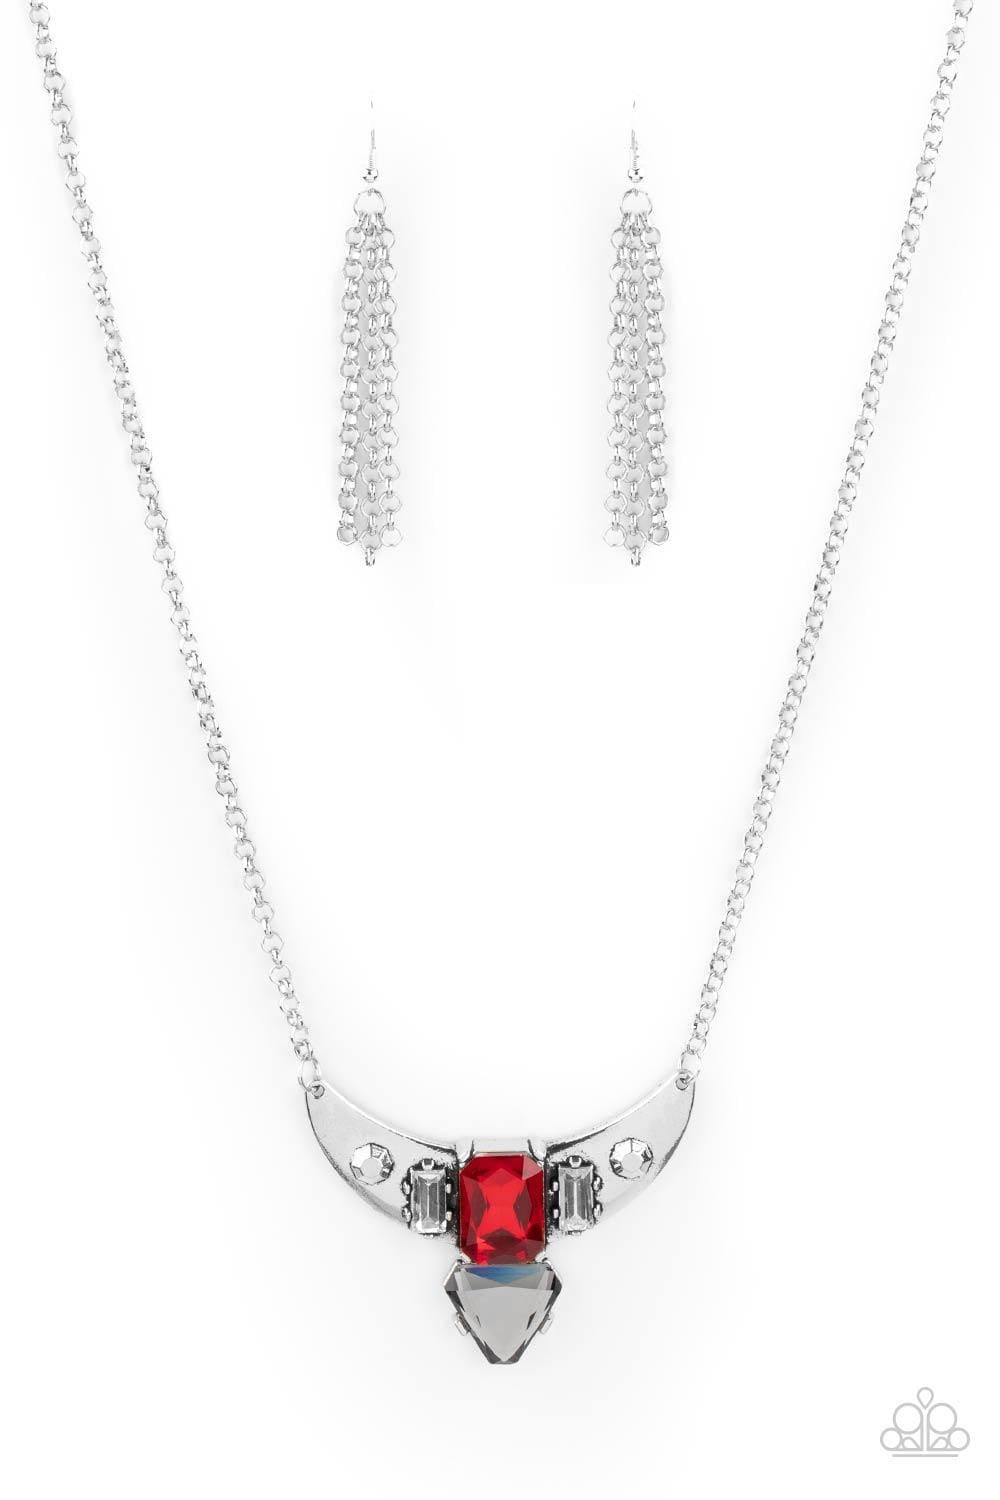 Paparazzi Accessories - You The Talisman! - Red Necklace - Bling by JessieK